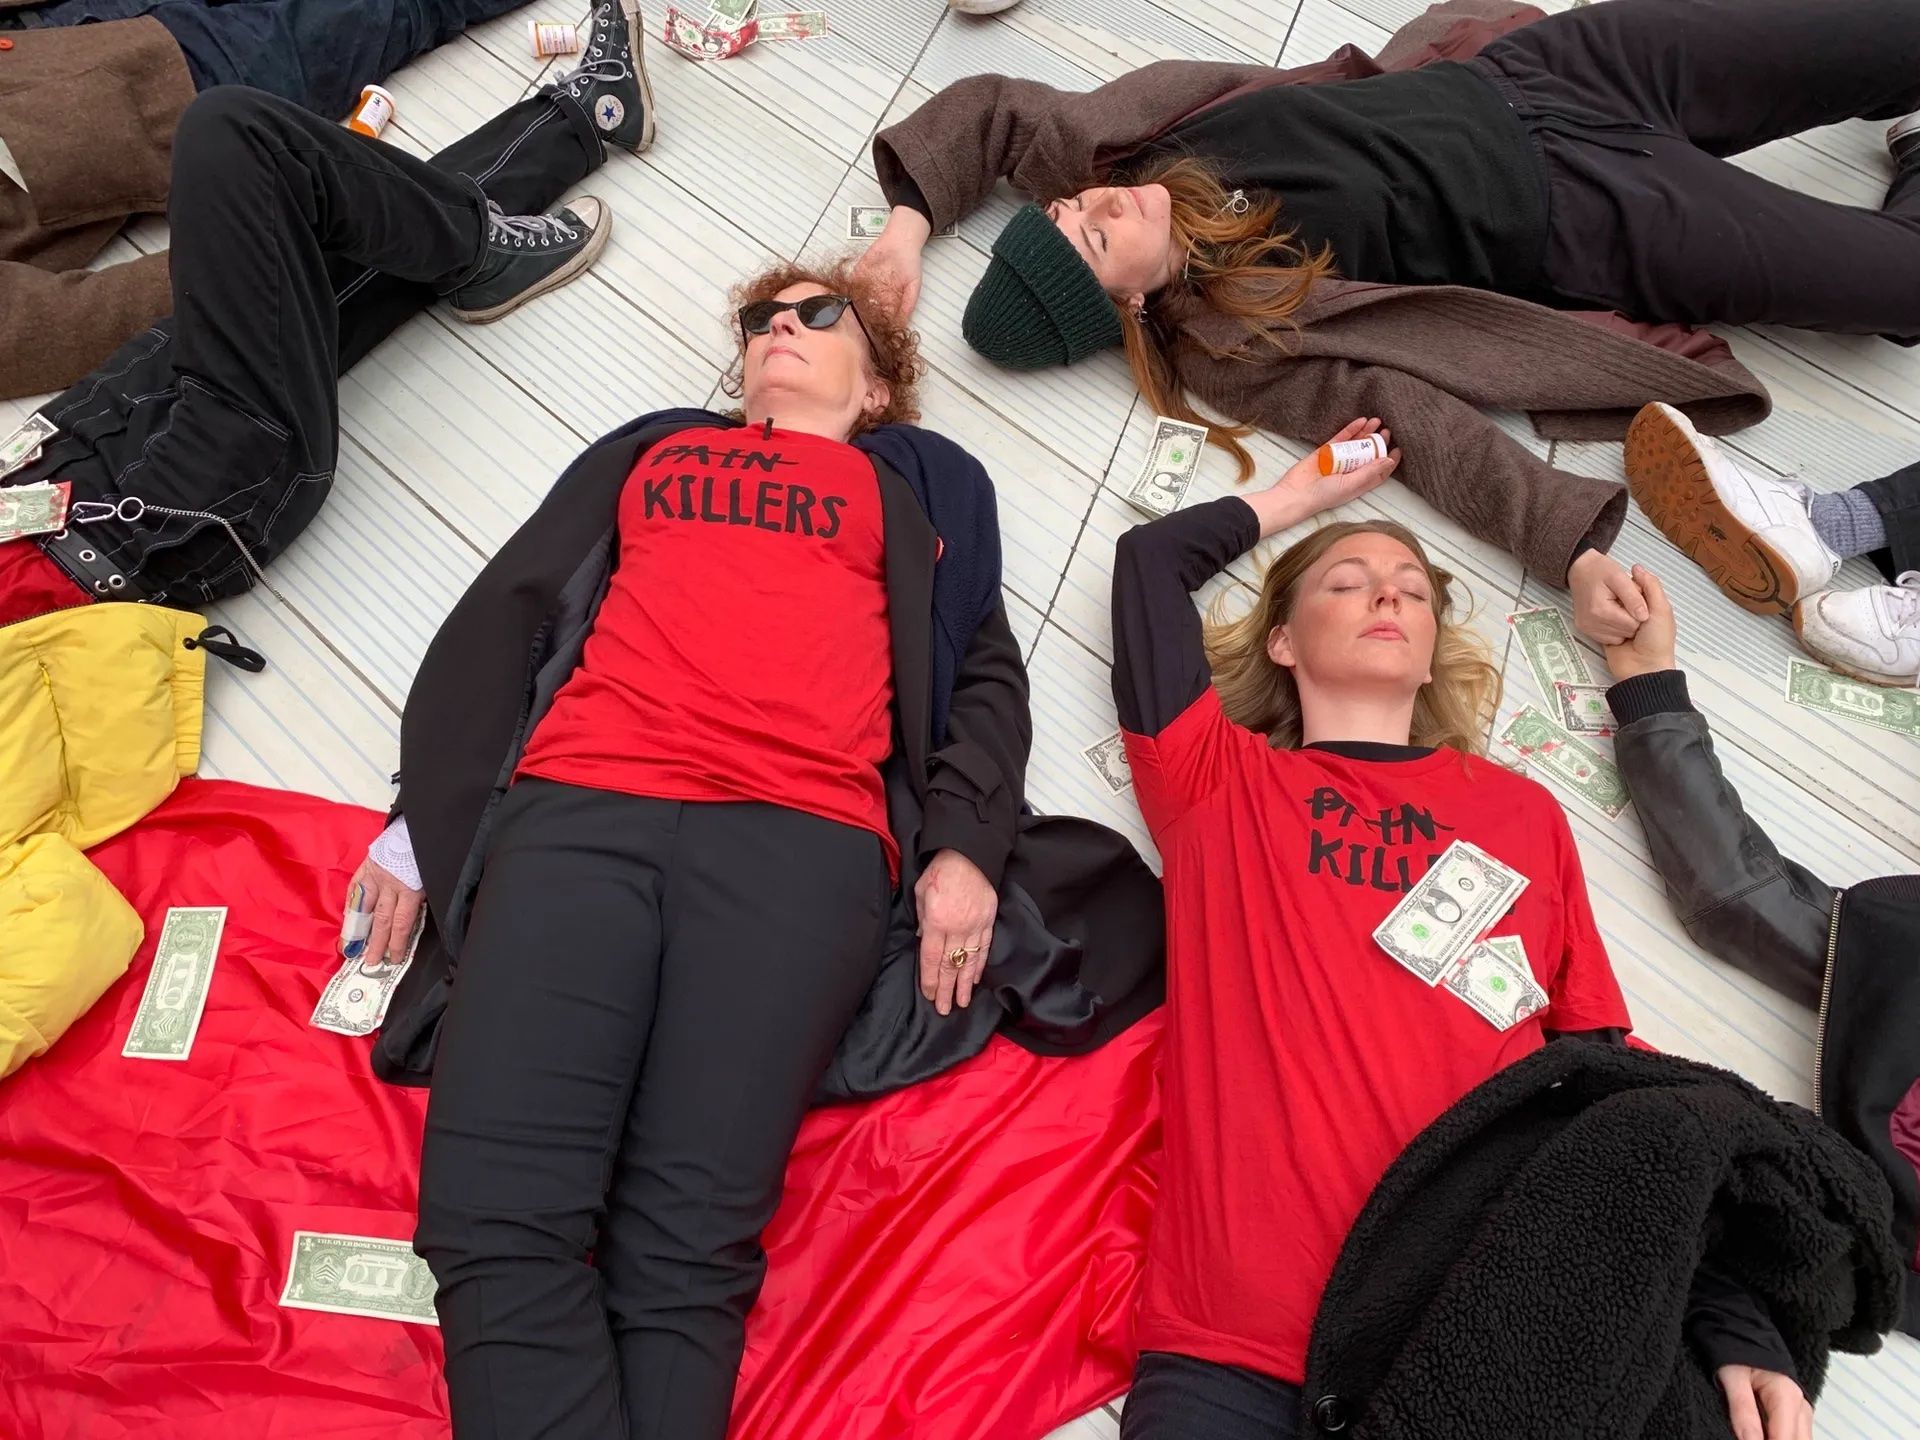 Nan Goldin during a "die-in" protest at the Victoria and Albert Museum in London in 2019 Gareth Harris